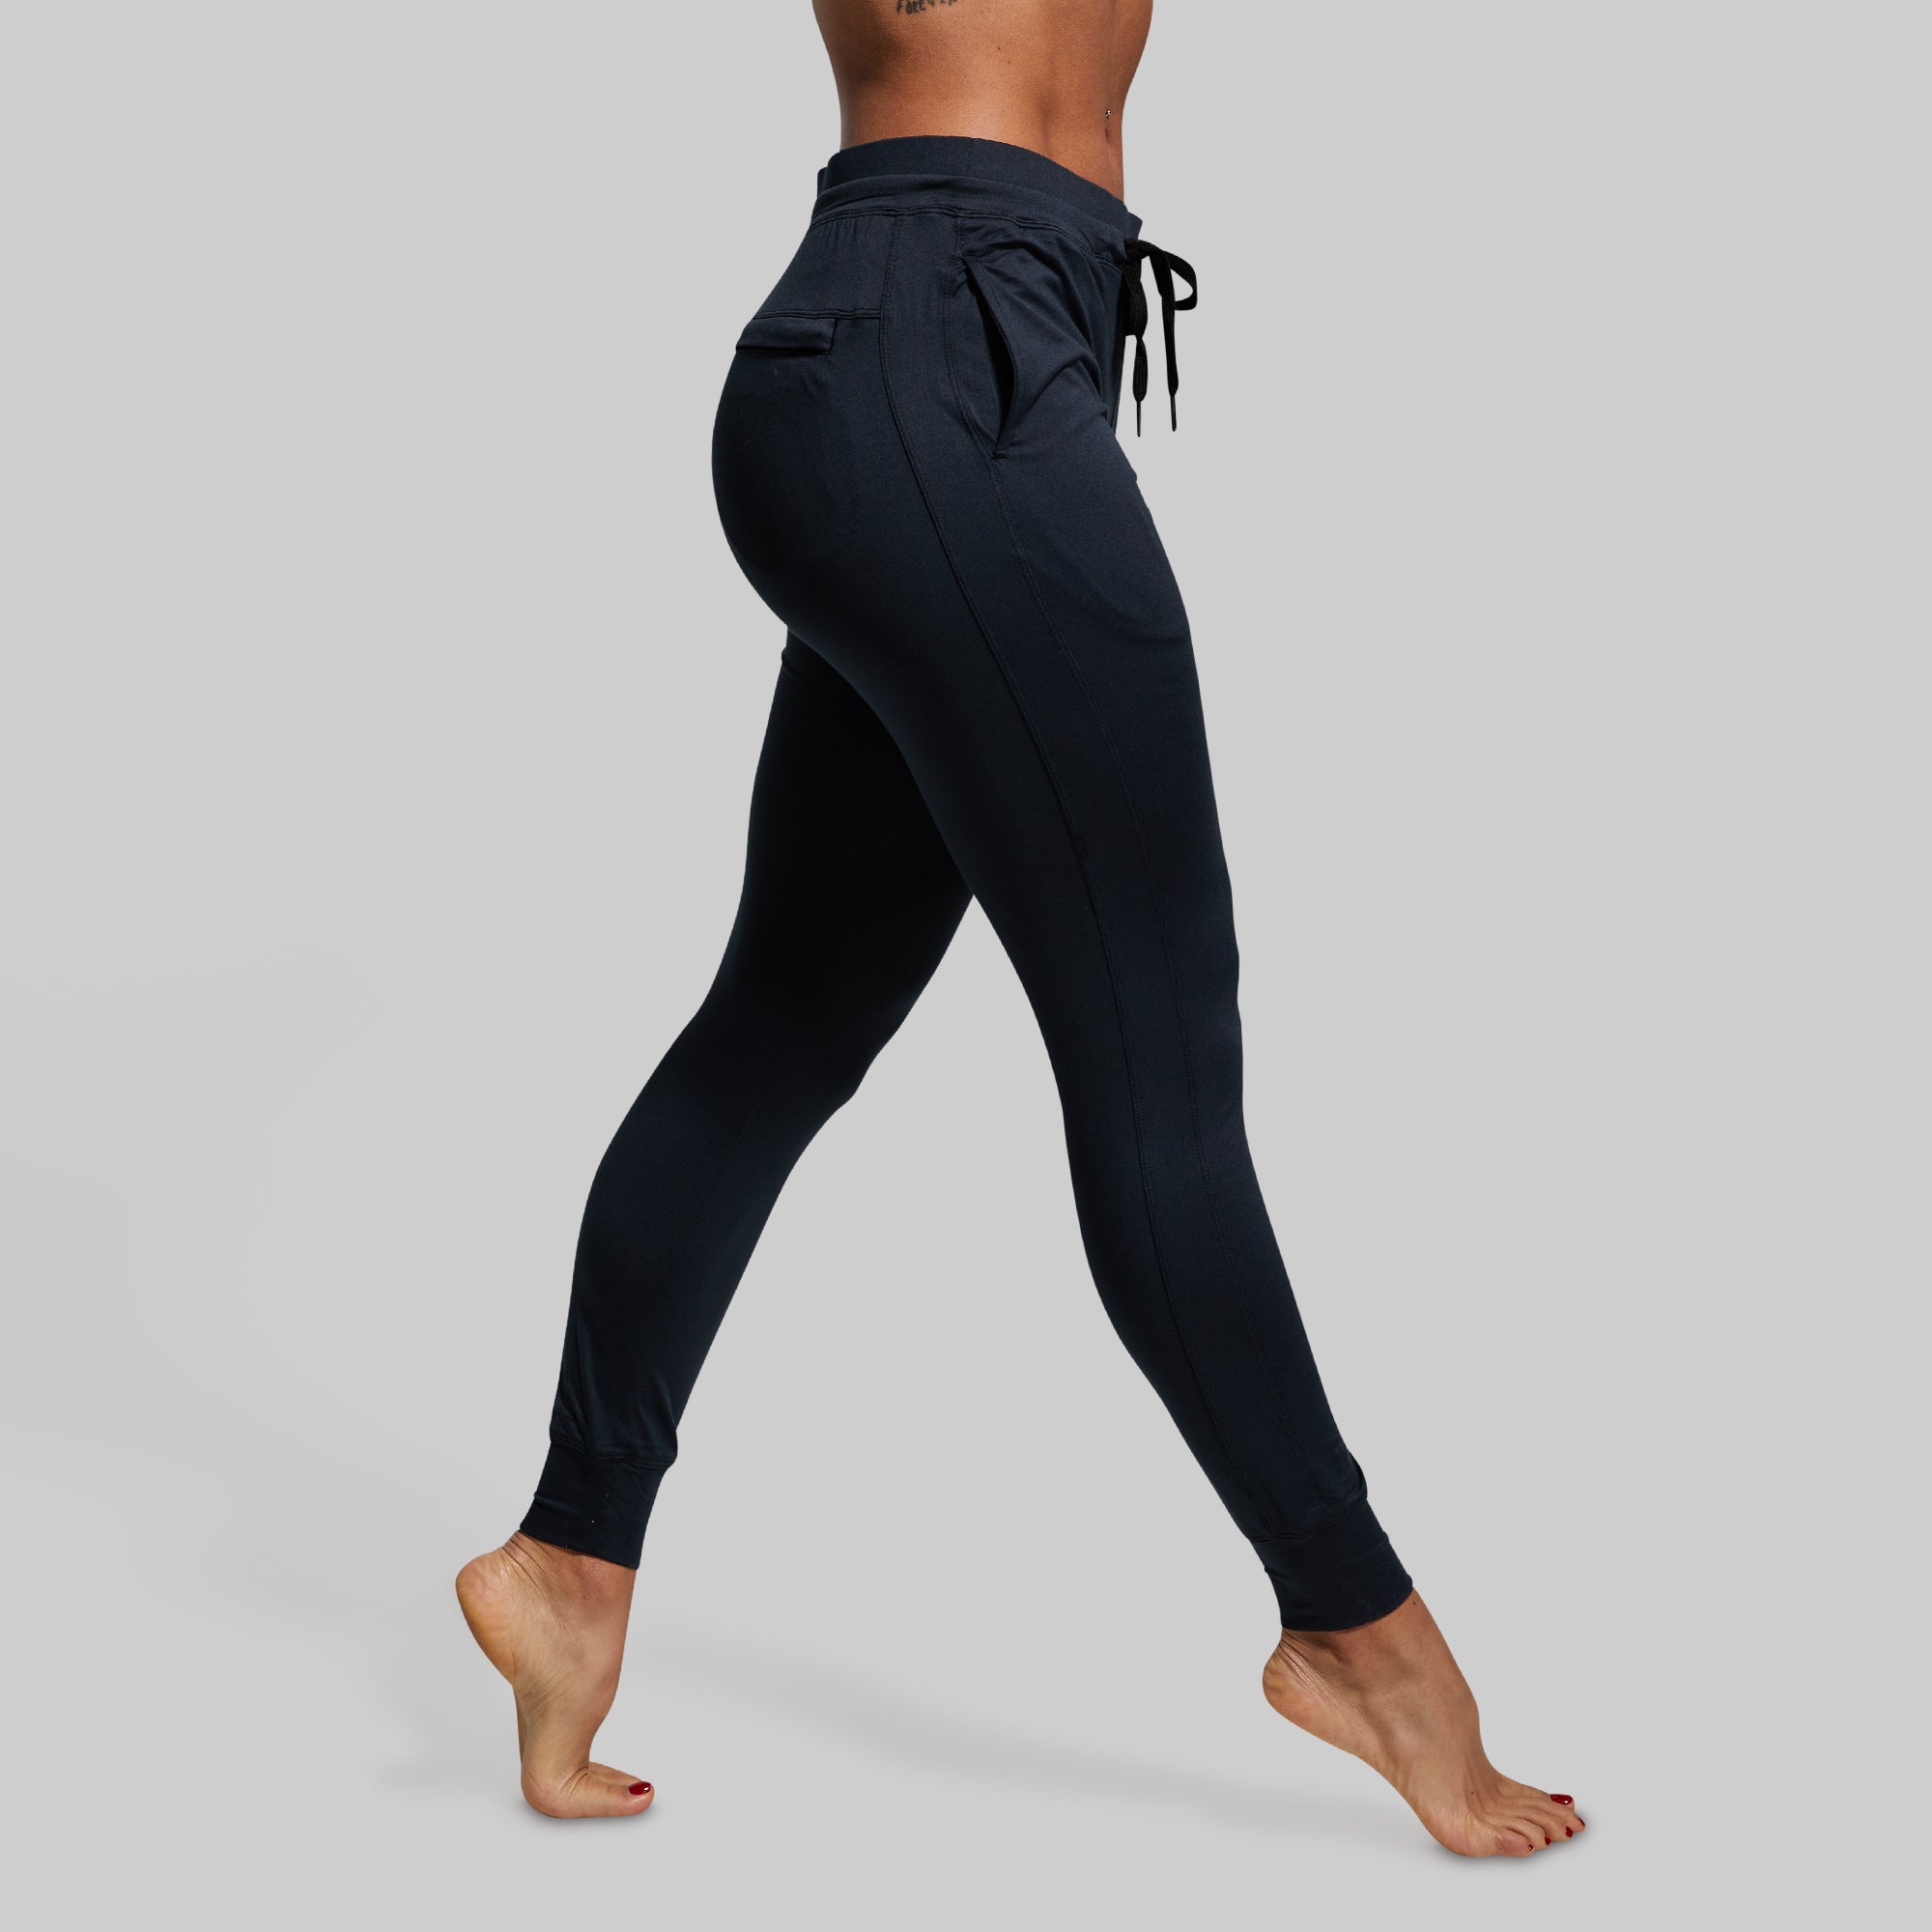 High waisted casual joggers / green - Untamed Athletics